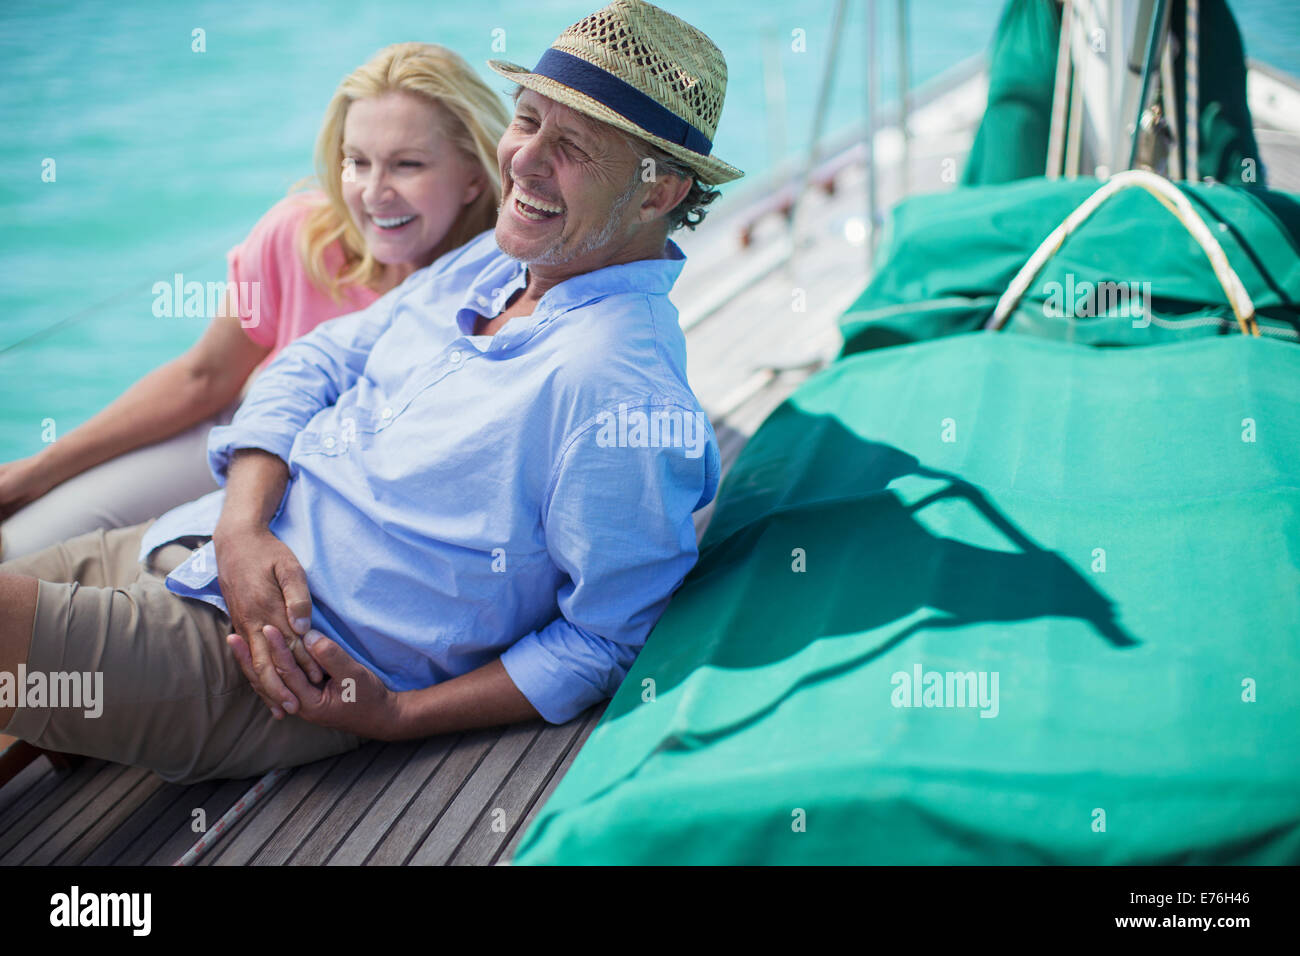 Couple sitting on boat together Stock Photo